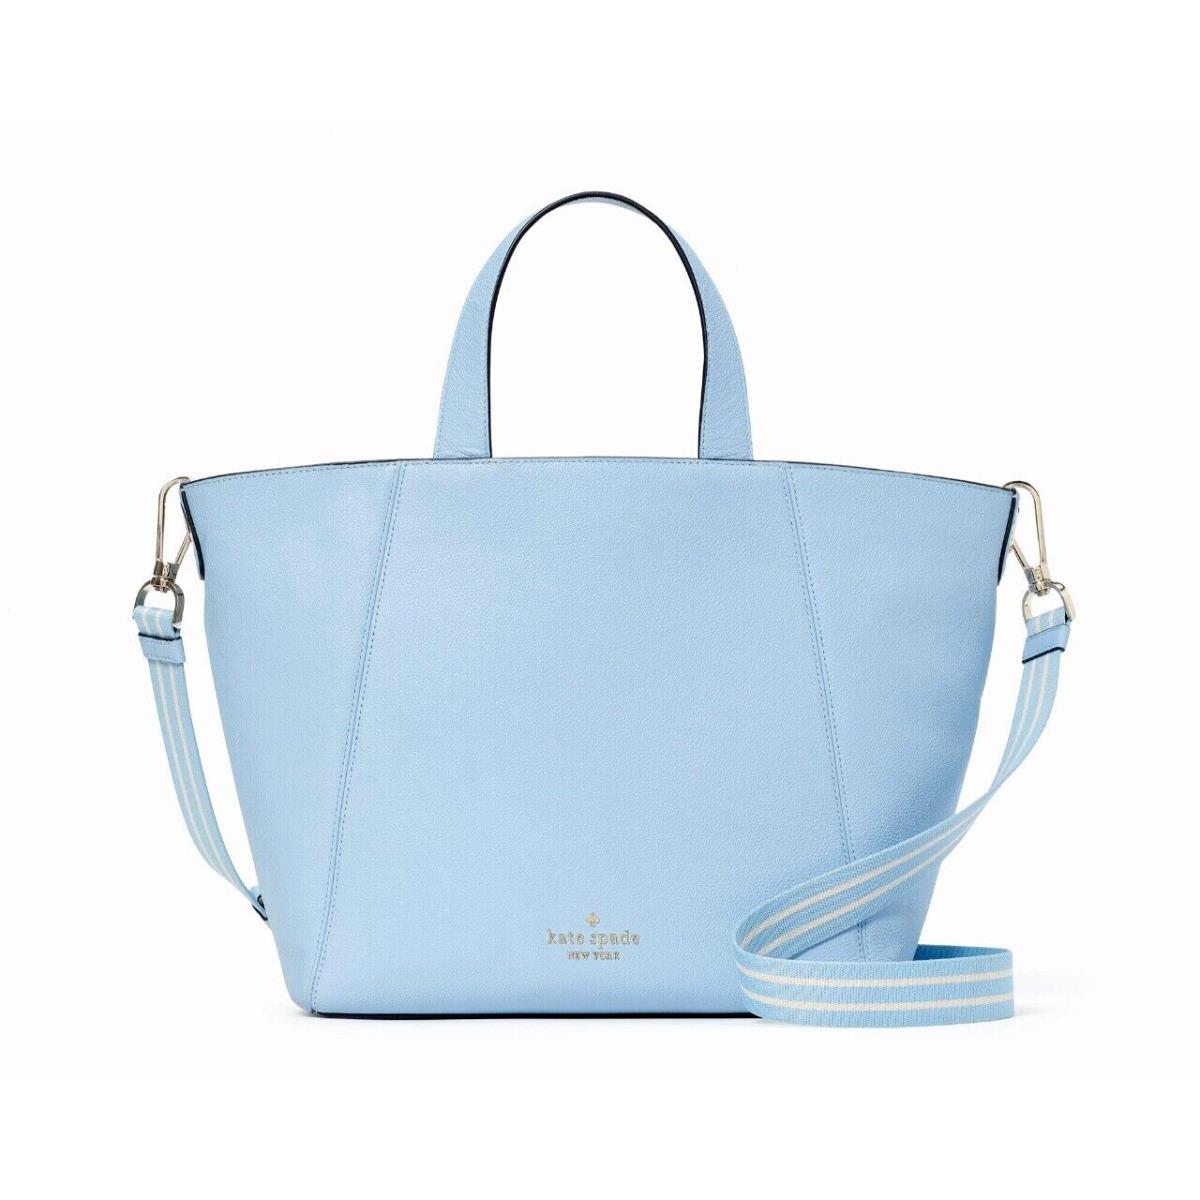 New Kate Spade Rosie Satchel Pebbled Leather Celeste Blue with Dust Bag